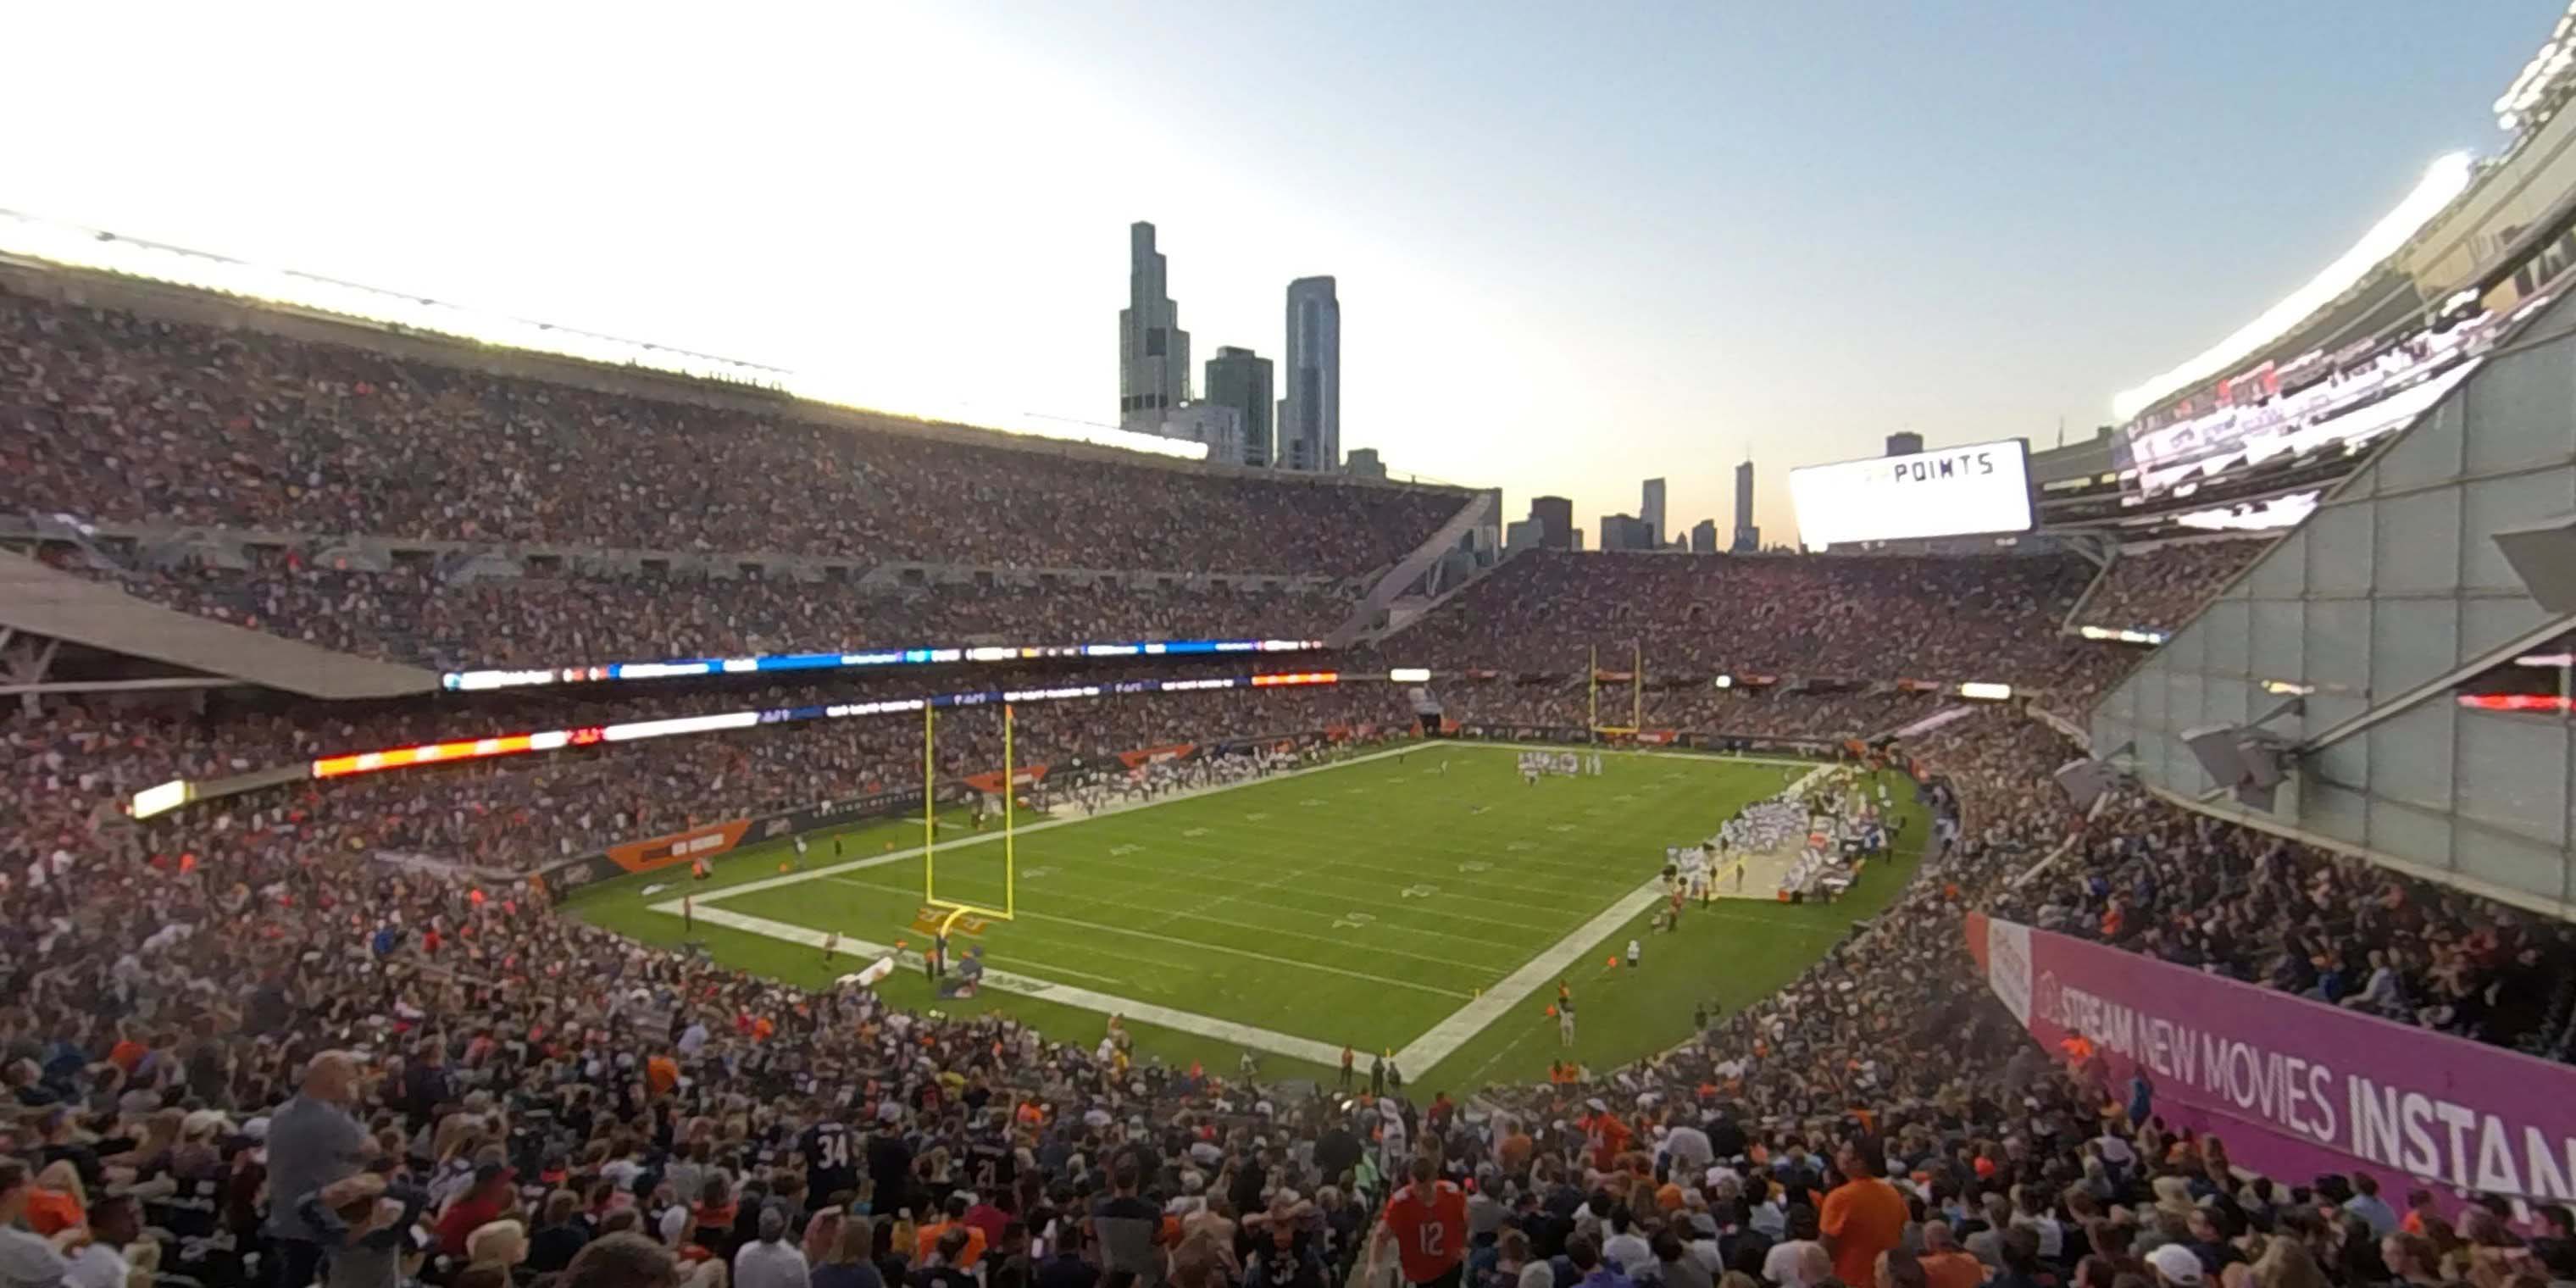 section 318 panoramic seat view  for football - soldier field